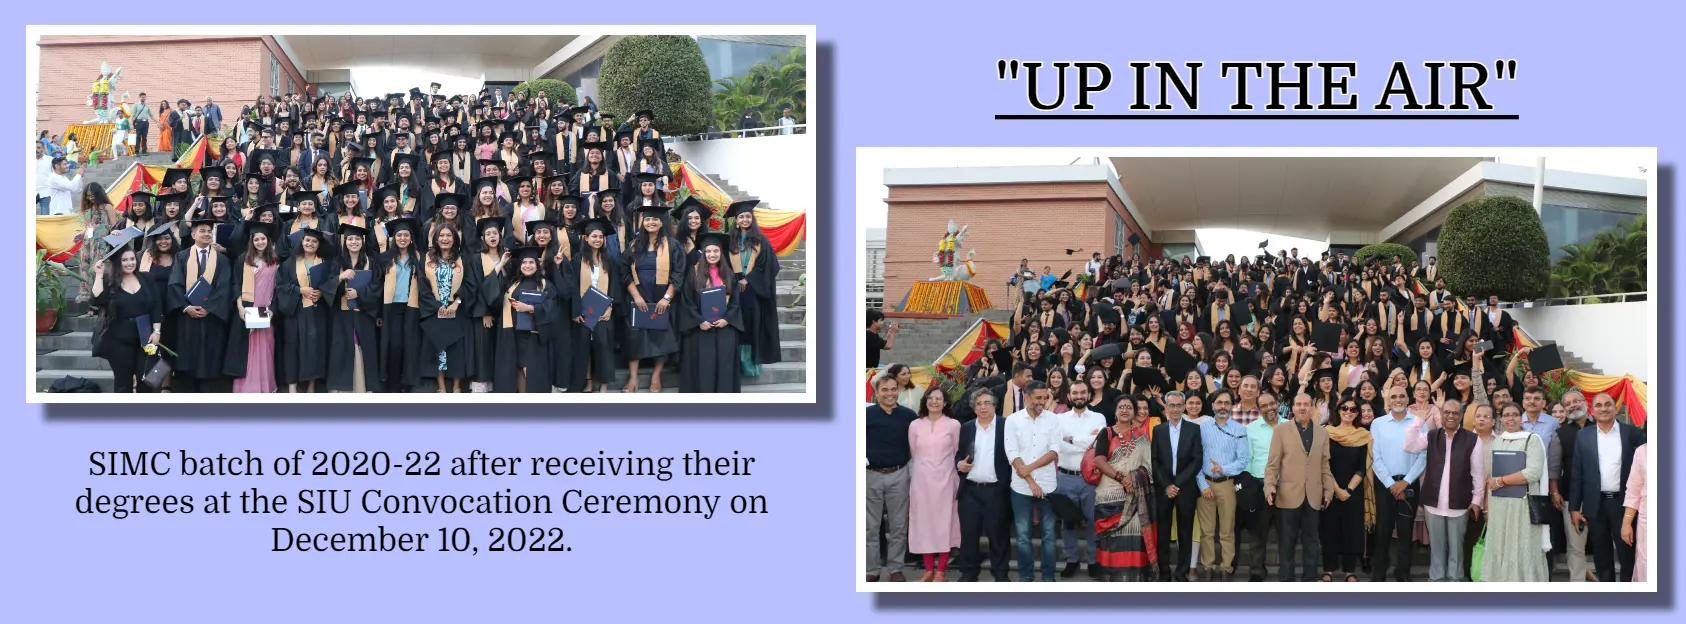 SIMC batch of 2020-22 after receiving their degrees at the SIU Convocation Ceremony on December 10, 2022